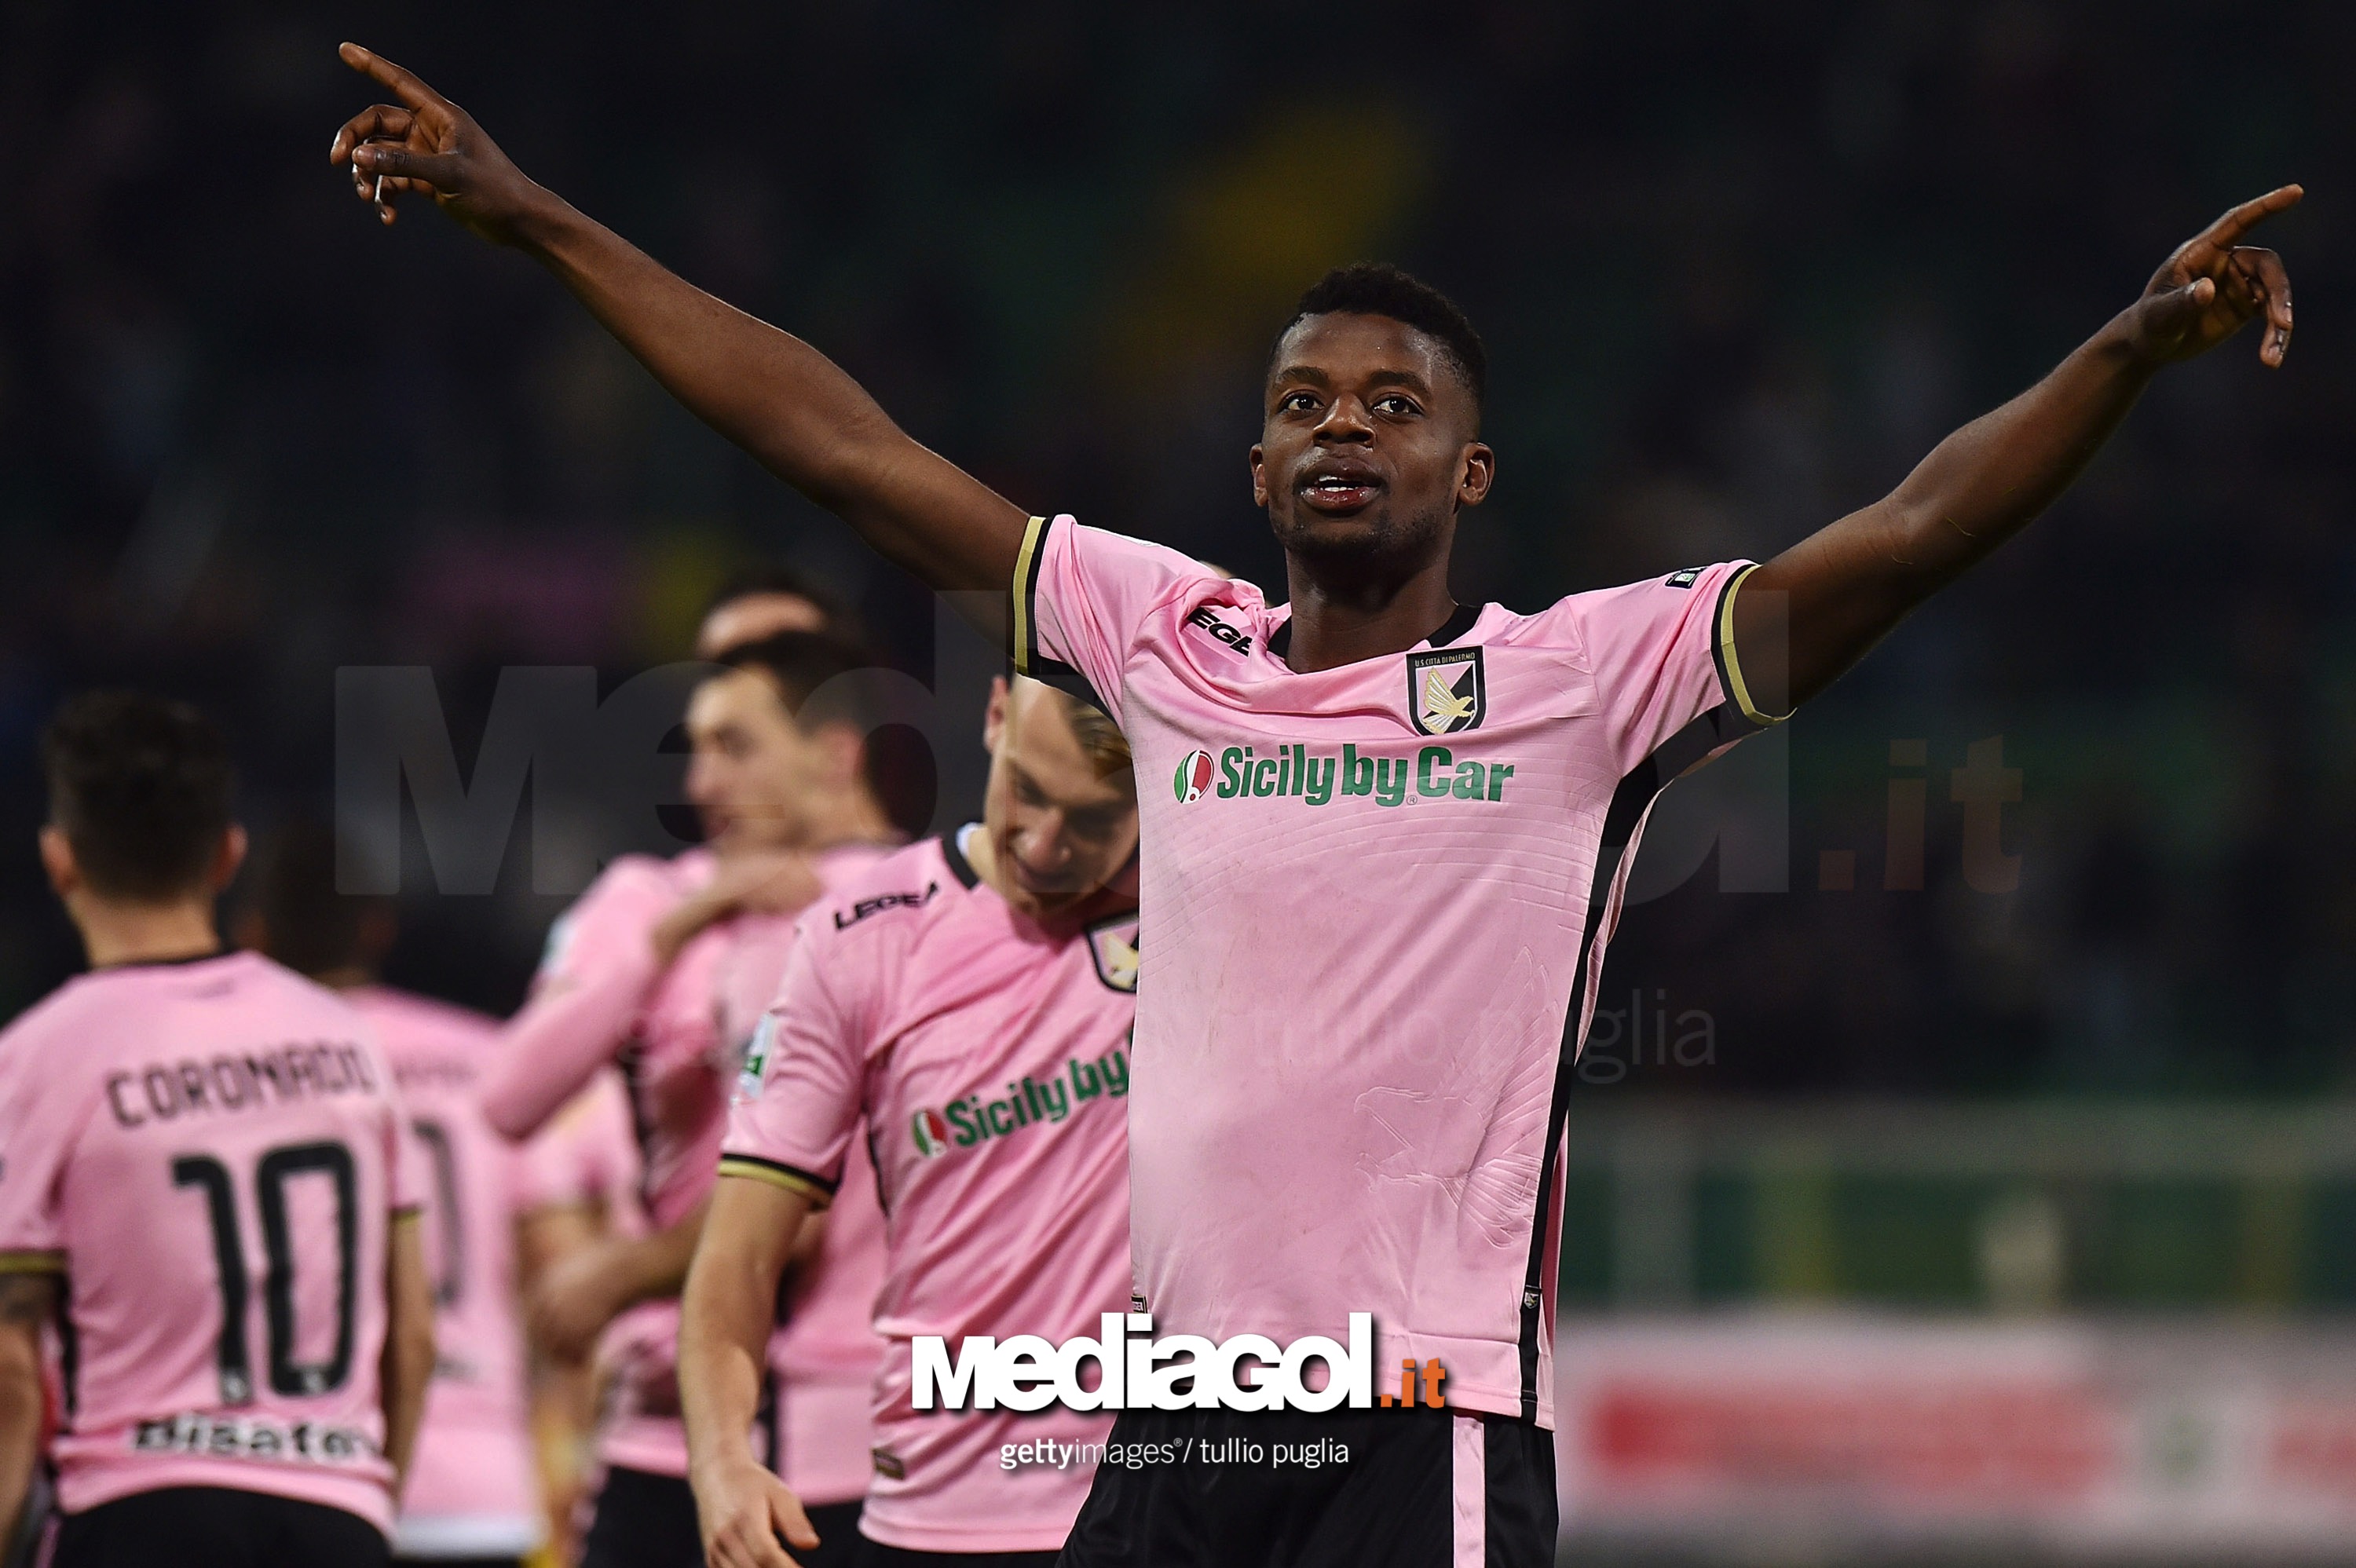 PALERMO, ITALY - MARCH 10:  Eddy Gnahore' of Palermo celebrates after scoring the opening goal uring the serie B match between US Citta di Palermo and Frosinone  at Stadio Renzo Barbera on March 10, 2018 in Palermo, Italy.  (Photo by Tullio M. Puglia/Getty Images)